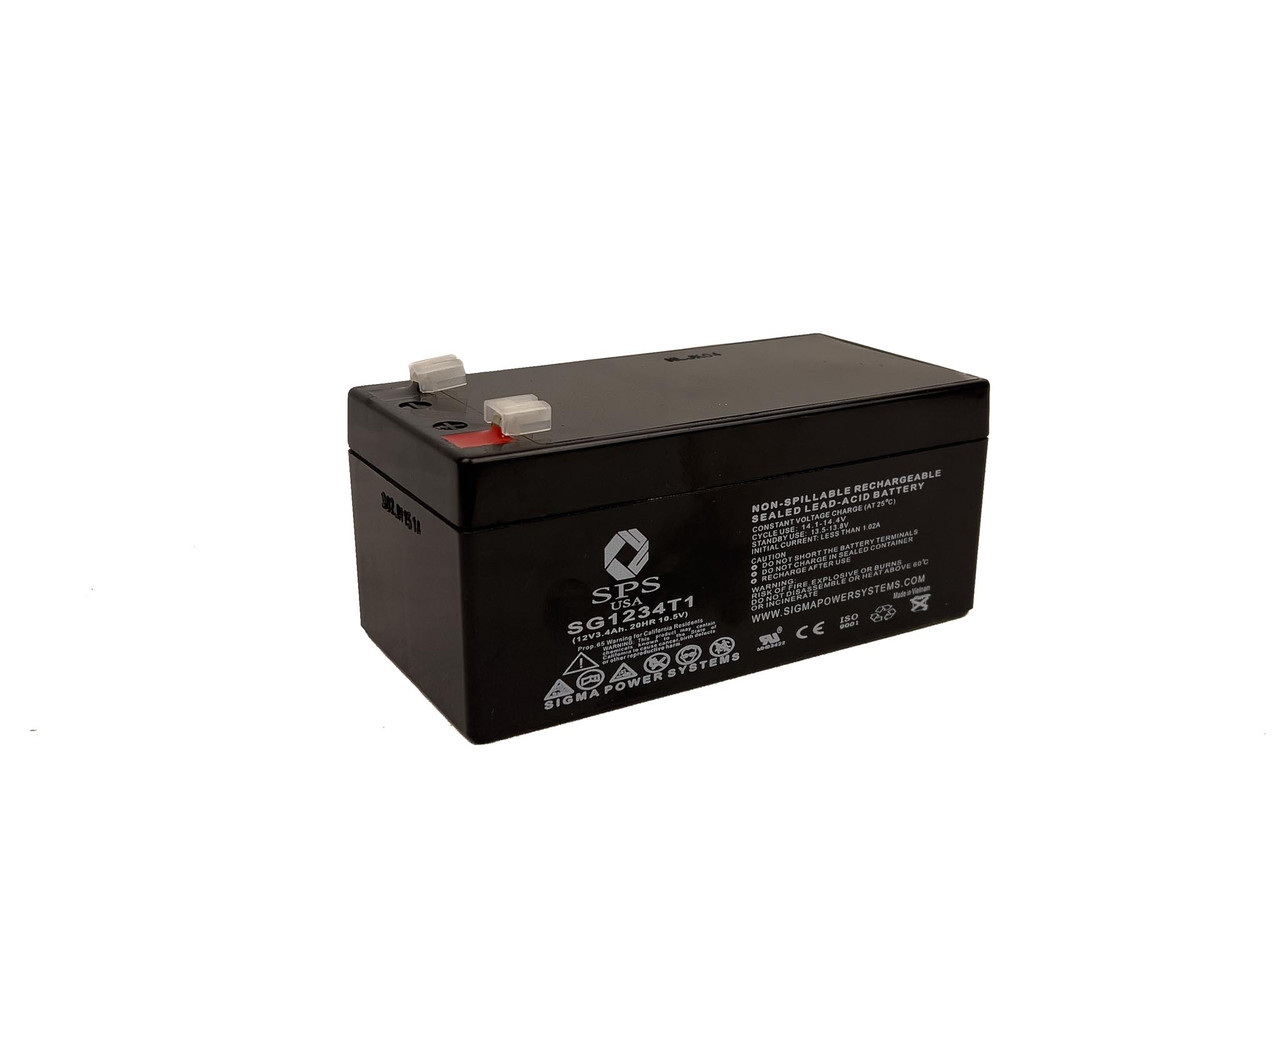 Raion Power 12V 3.4Ah Non-Spillable Replacement Battery for Wheel Horse 106-8397 Lawn Mower